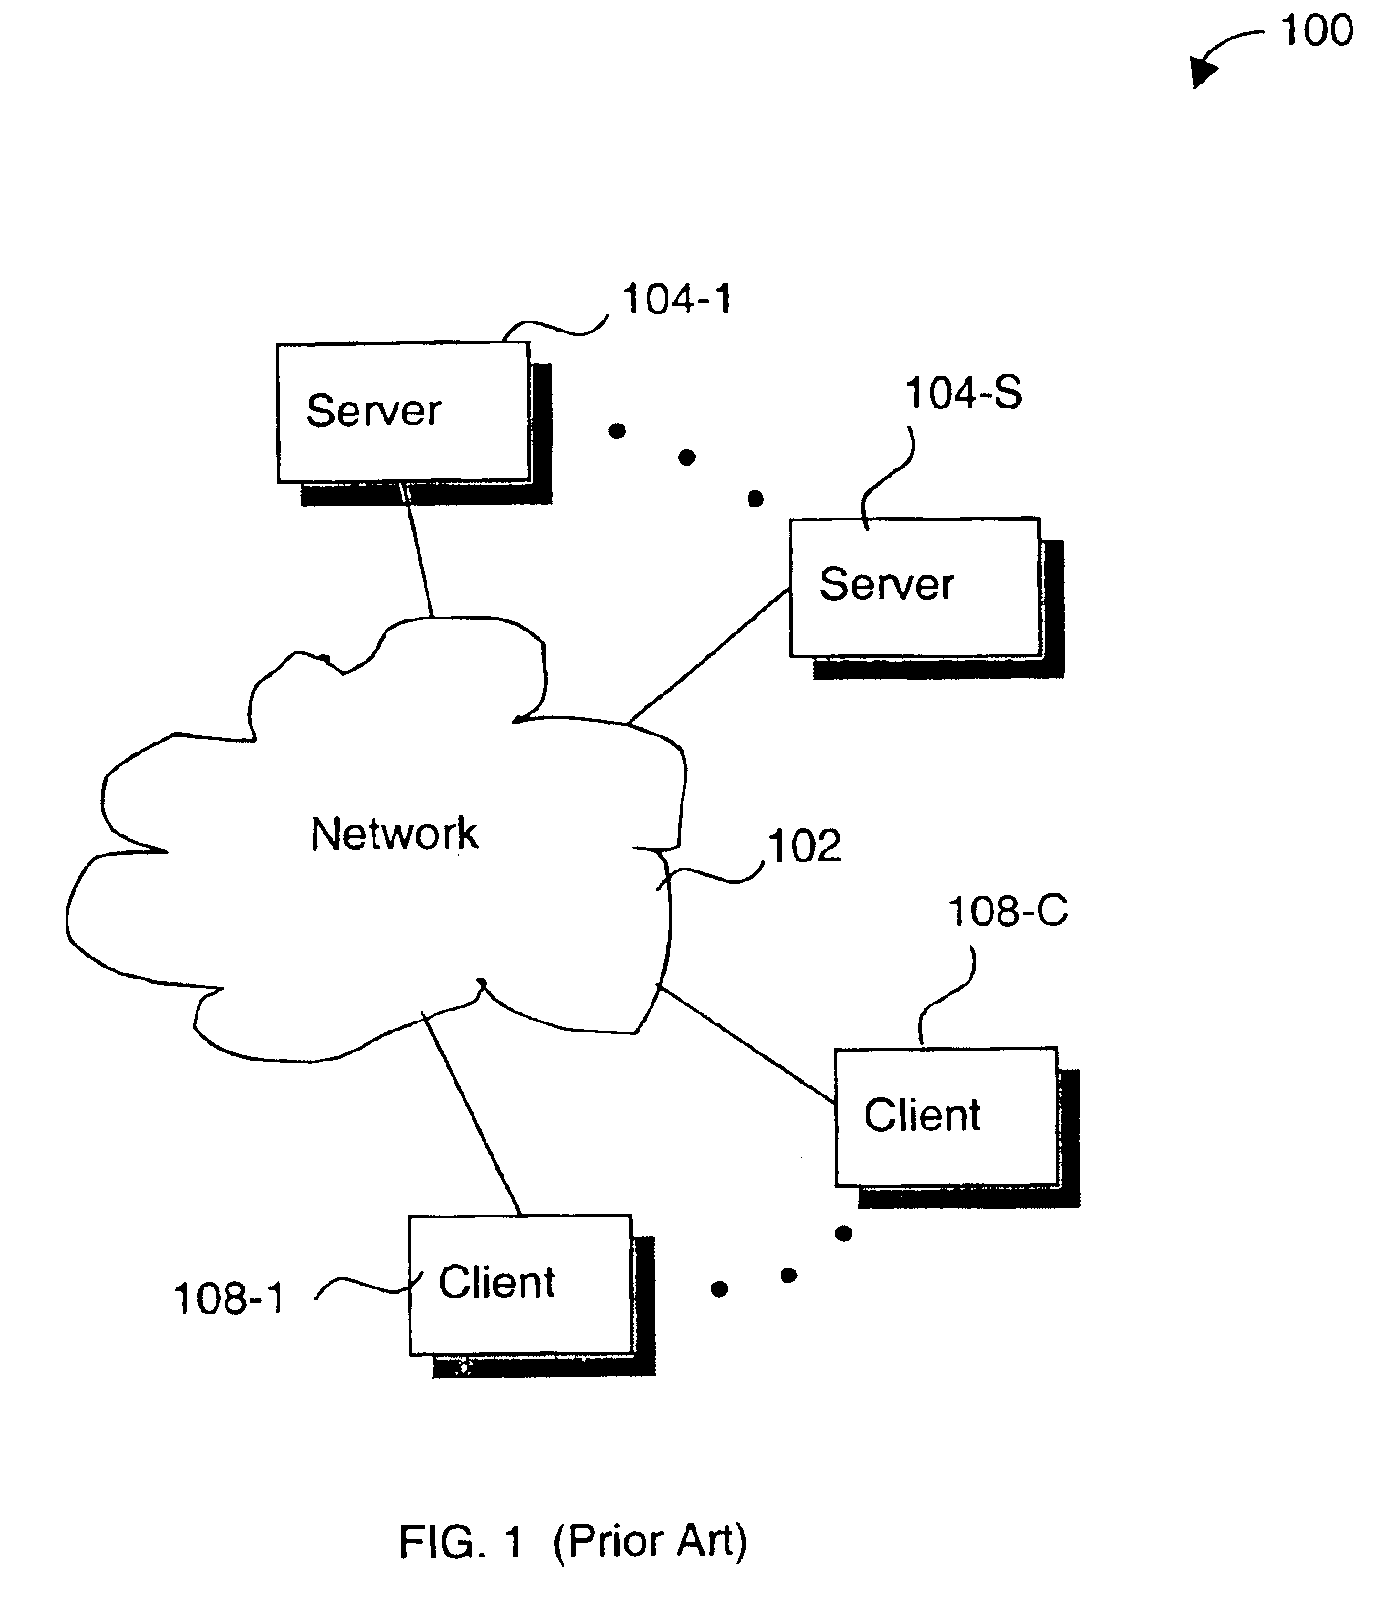 Method and apparatus for database mapping of XML objects into a relational database